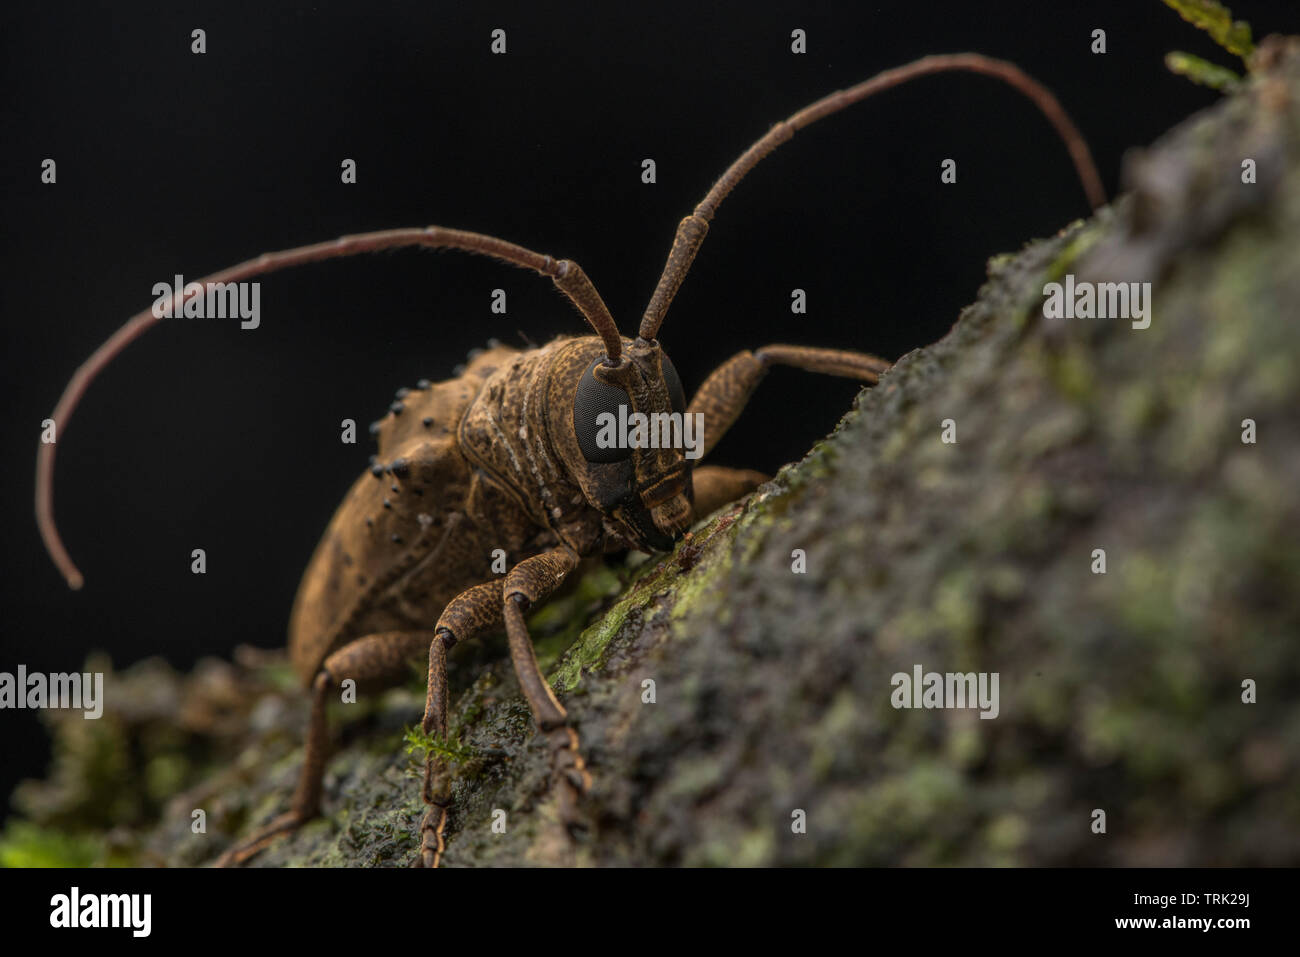 A longhorn beetle from the Cerambycidae family found in Yasuni national park in the Amazon rainforest of Ecuador. Stock Photo